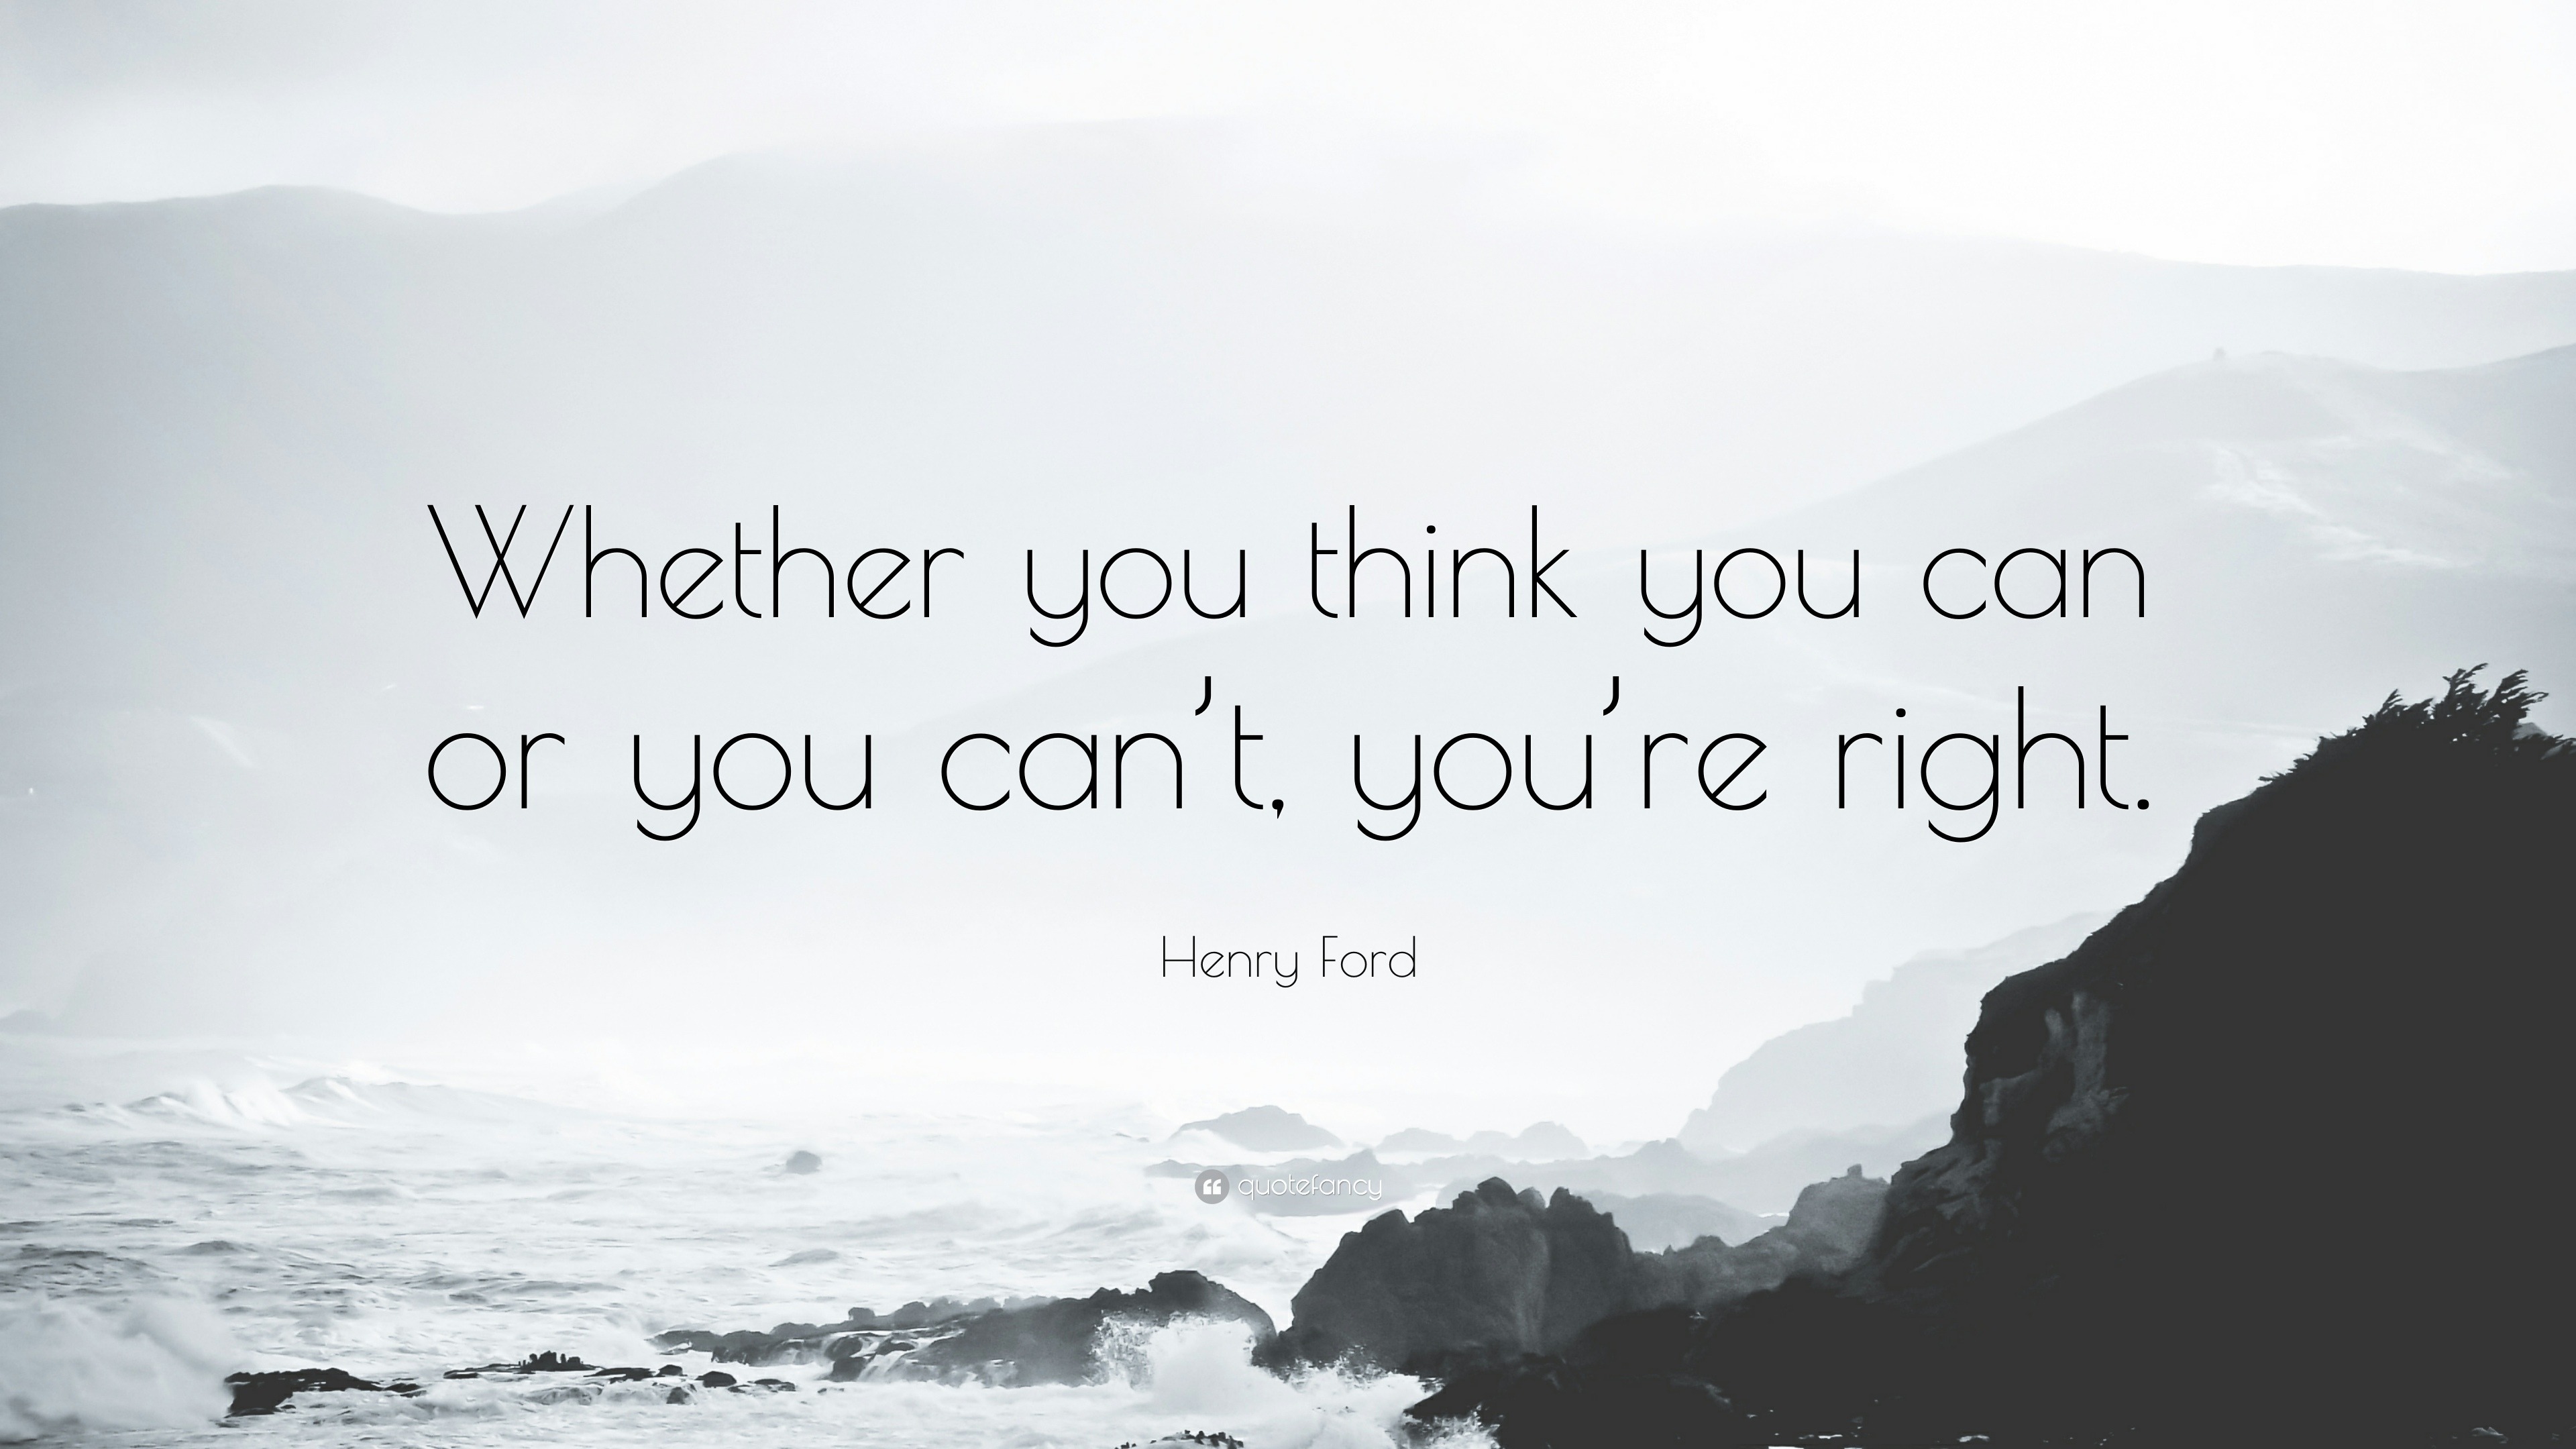 Henry ford if you think you can quote meaning #10